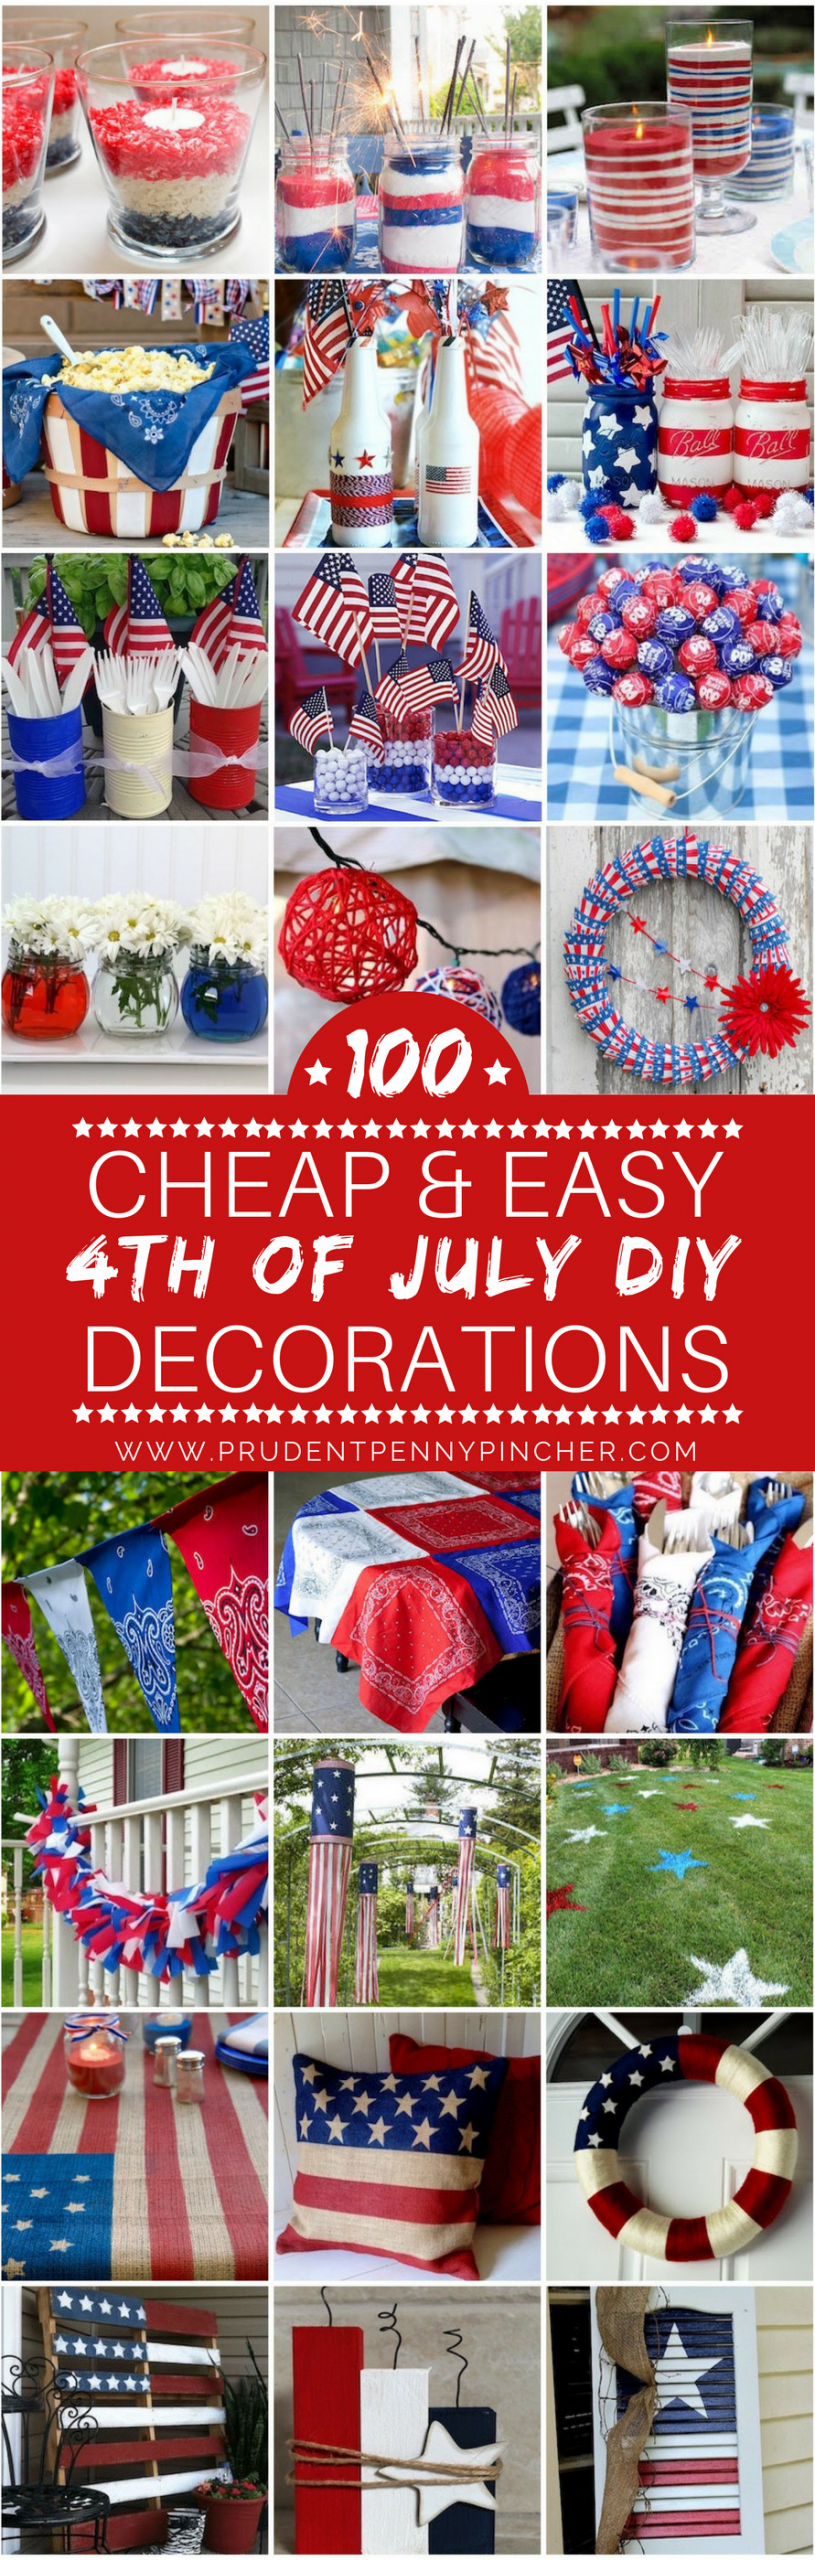 4th Of July Decorating Ideas
 100 Cheap and Easy 4th of July DIY Party Decor Ideas